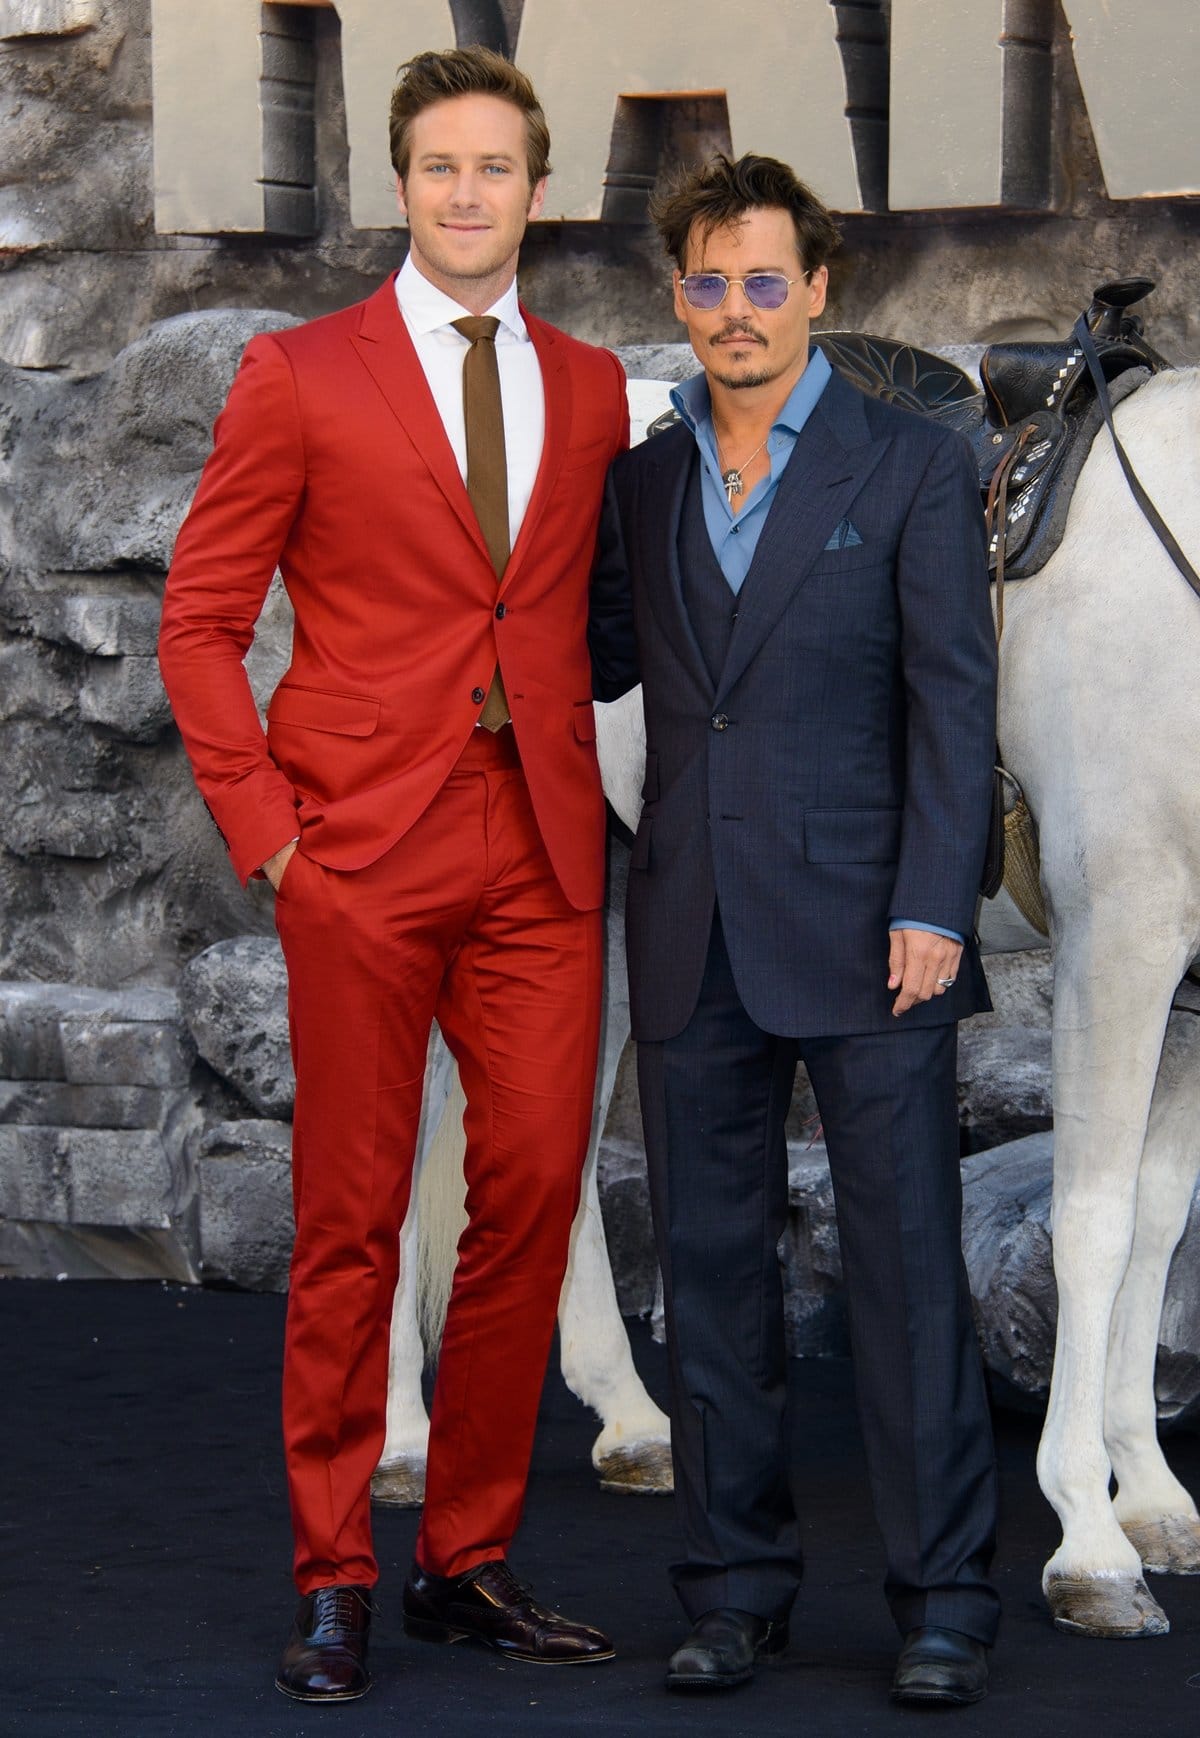 Johnny Depp looks short standing next to Armie Hammer, who measures 6′ 5″ (196 cm)